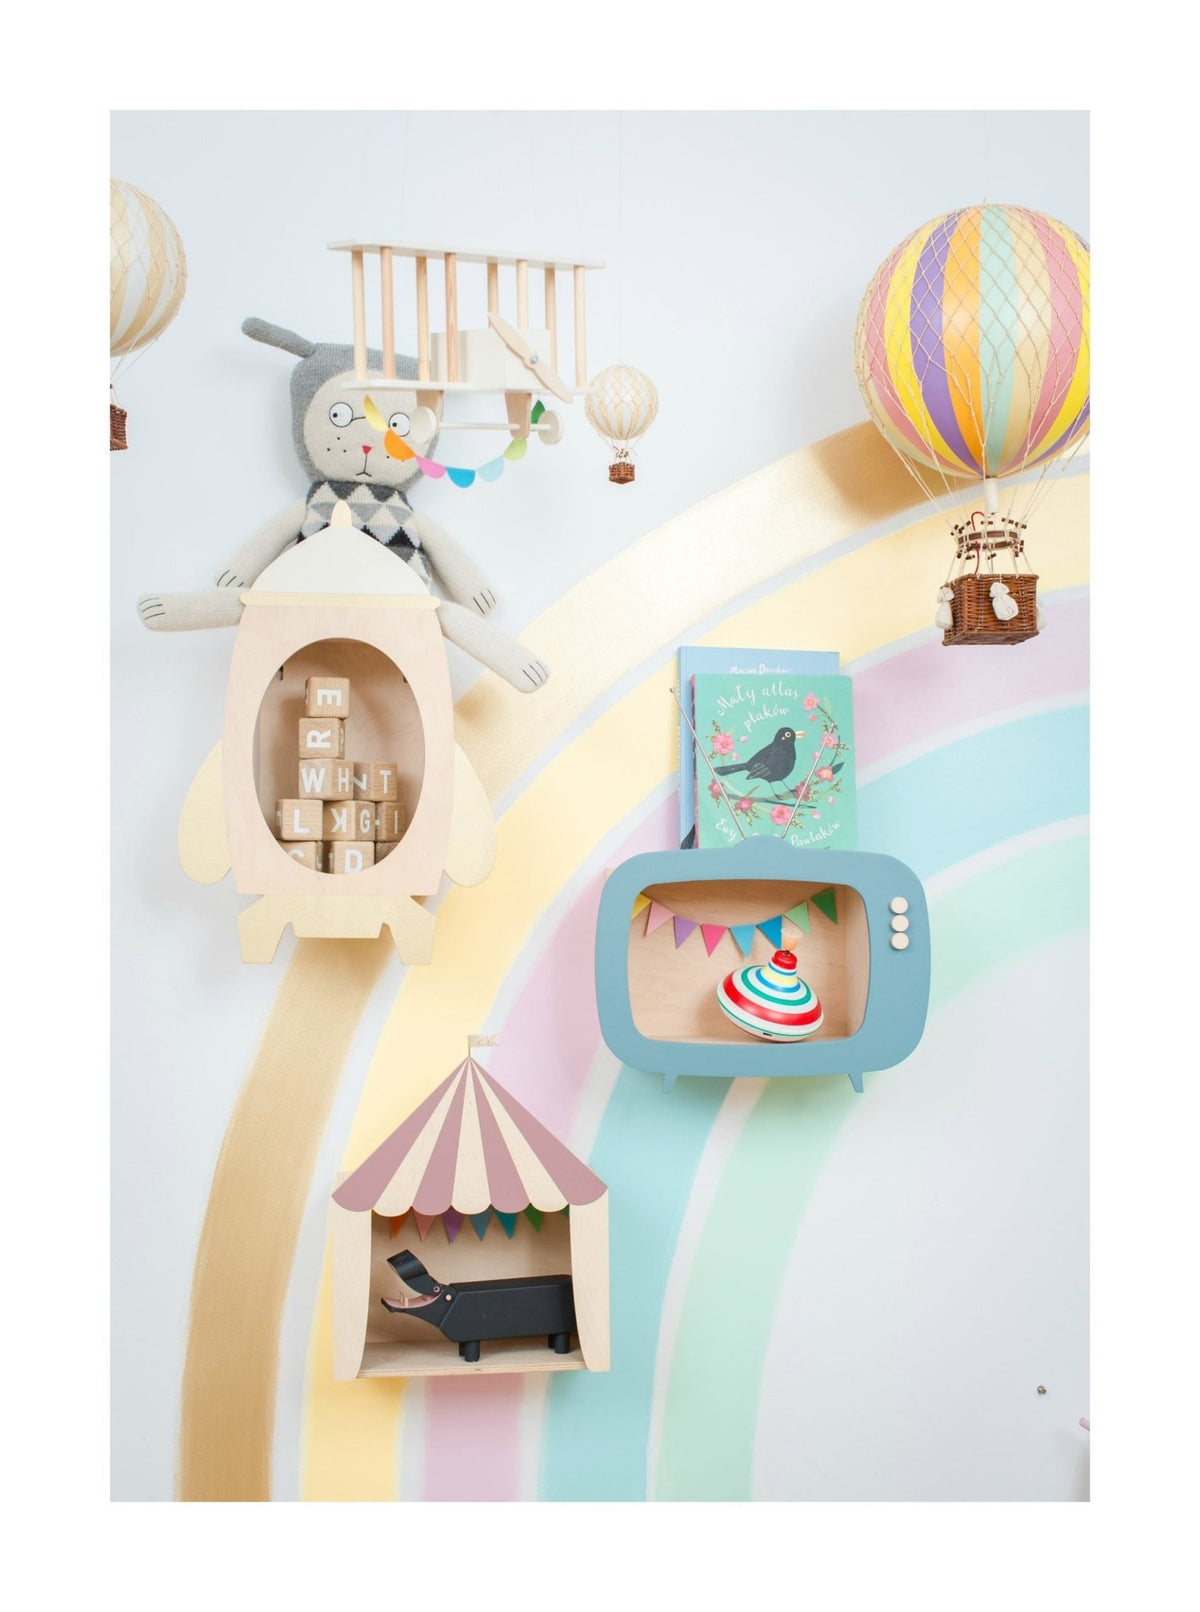 Circus Shelf "The Big Top" | Dusty Rose by Up! Warsaw - Maude Kids Decor